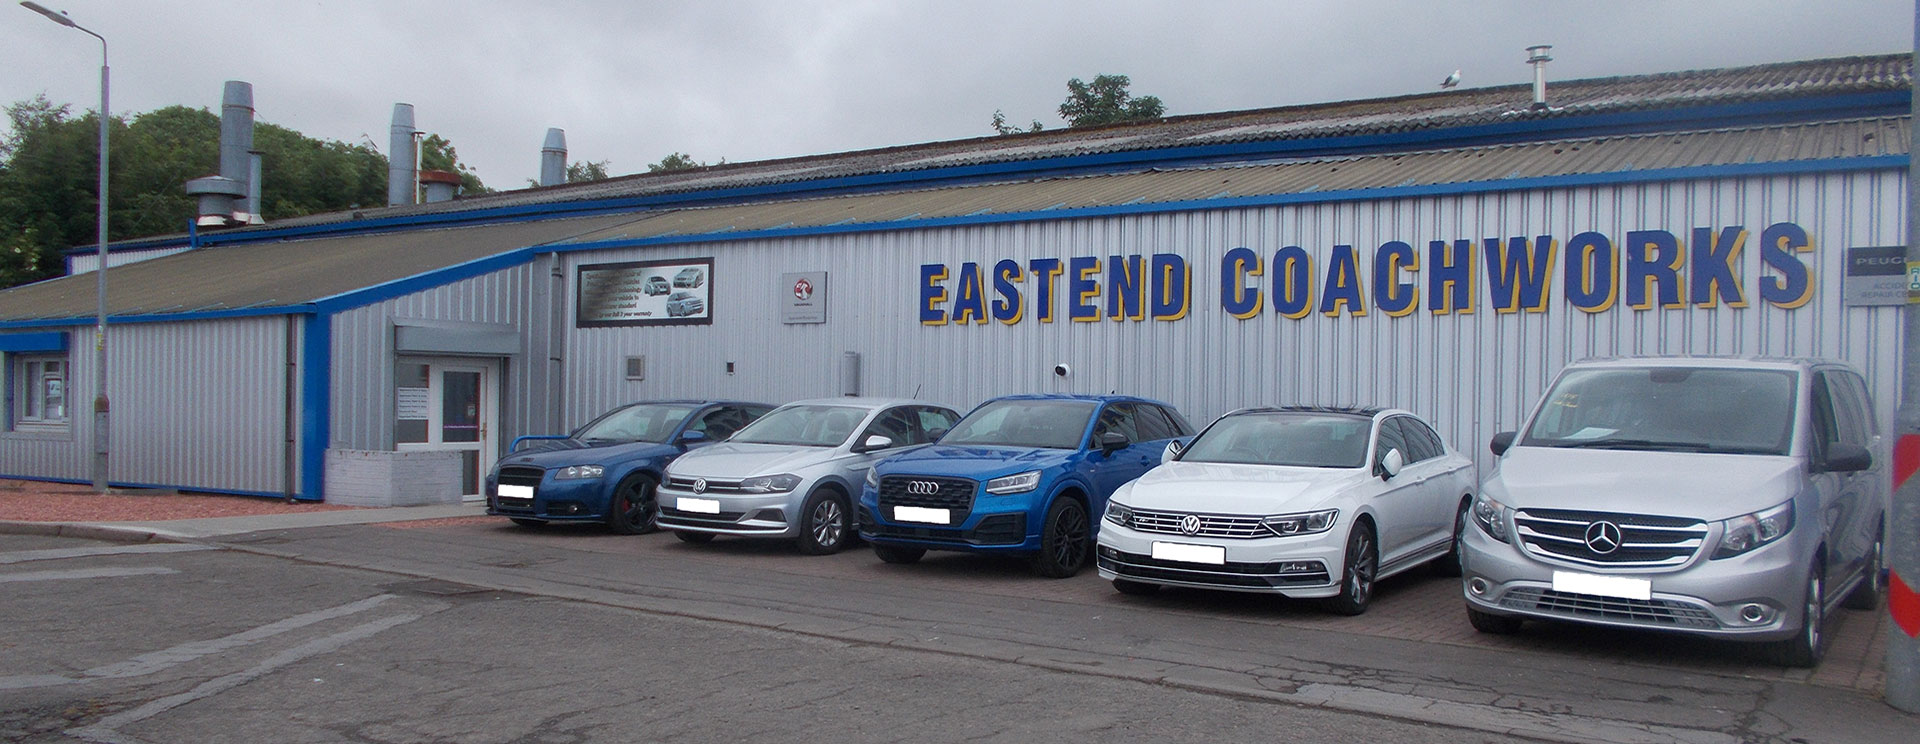 Welcome to Eastend Coachworks